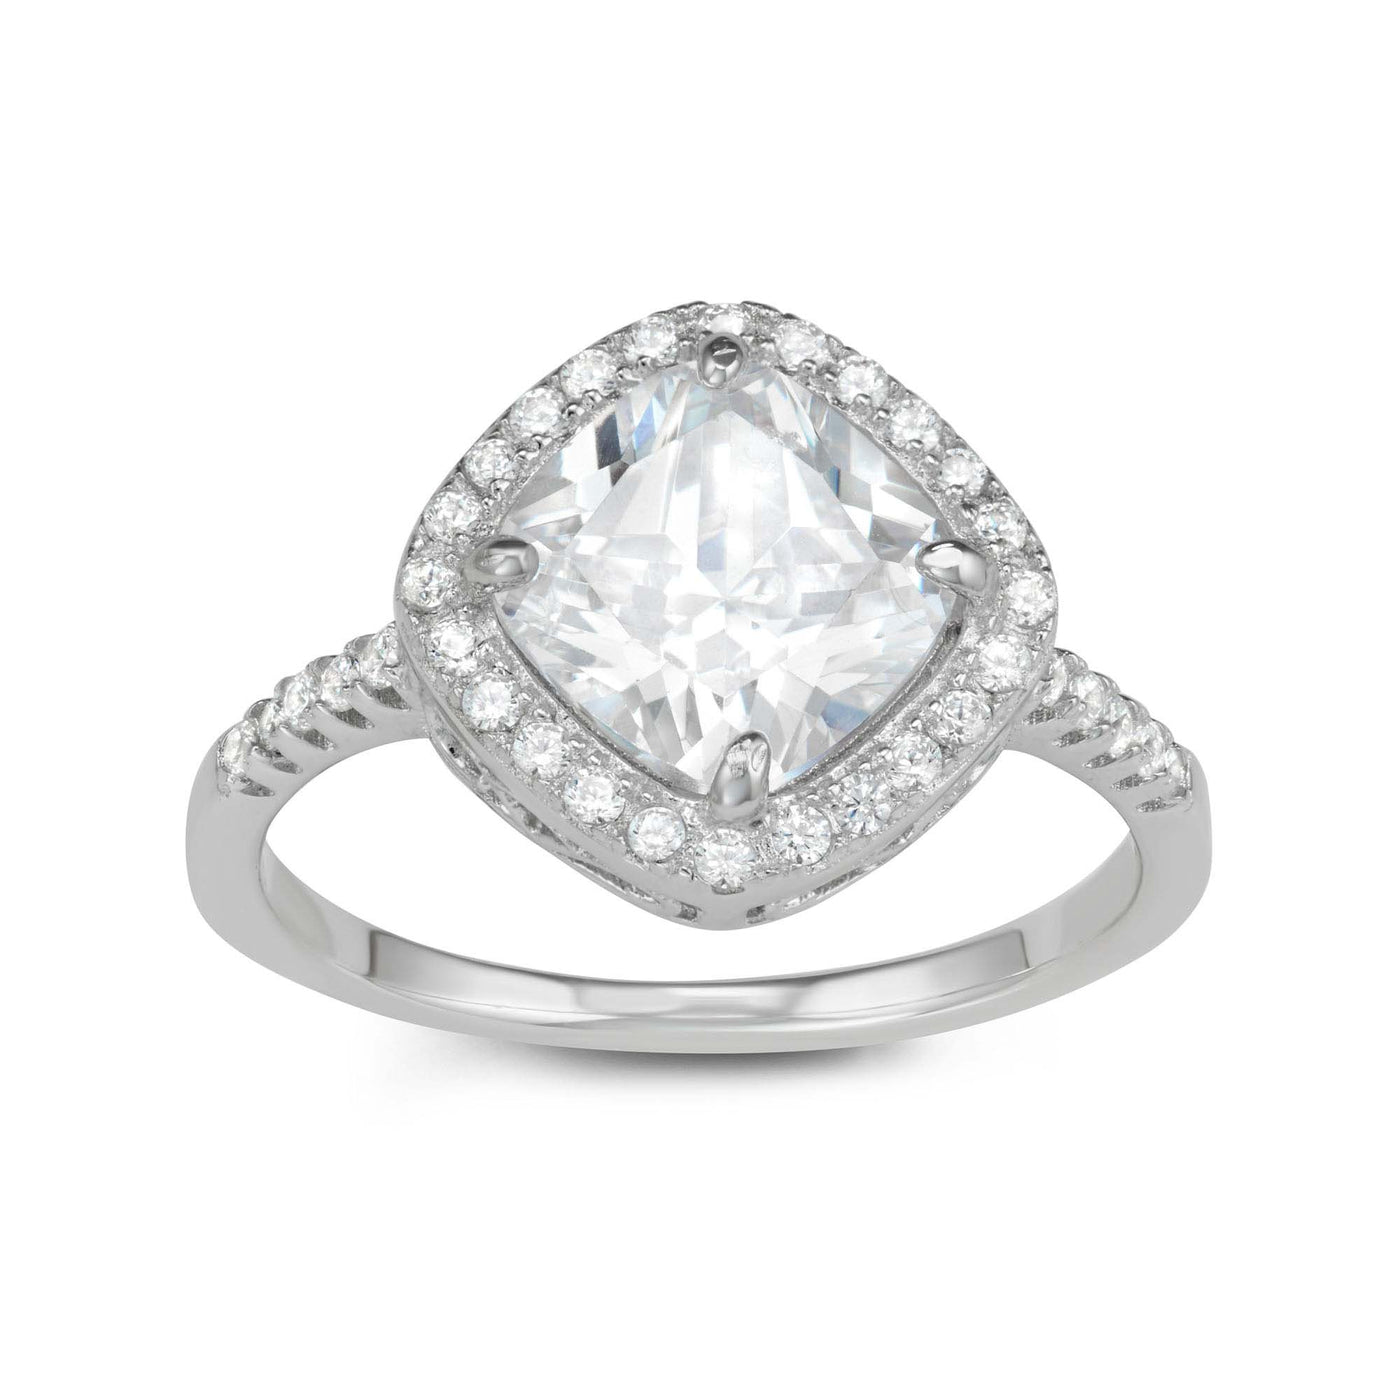 Rebecca Sloane Silver Cushion Ring With Faceted White CZ